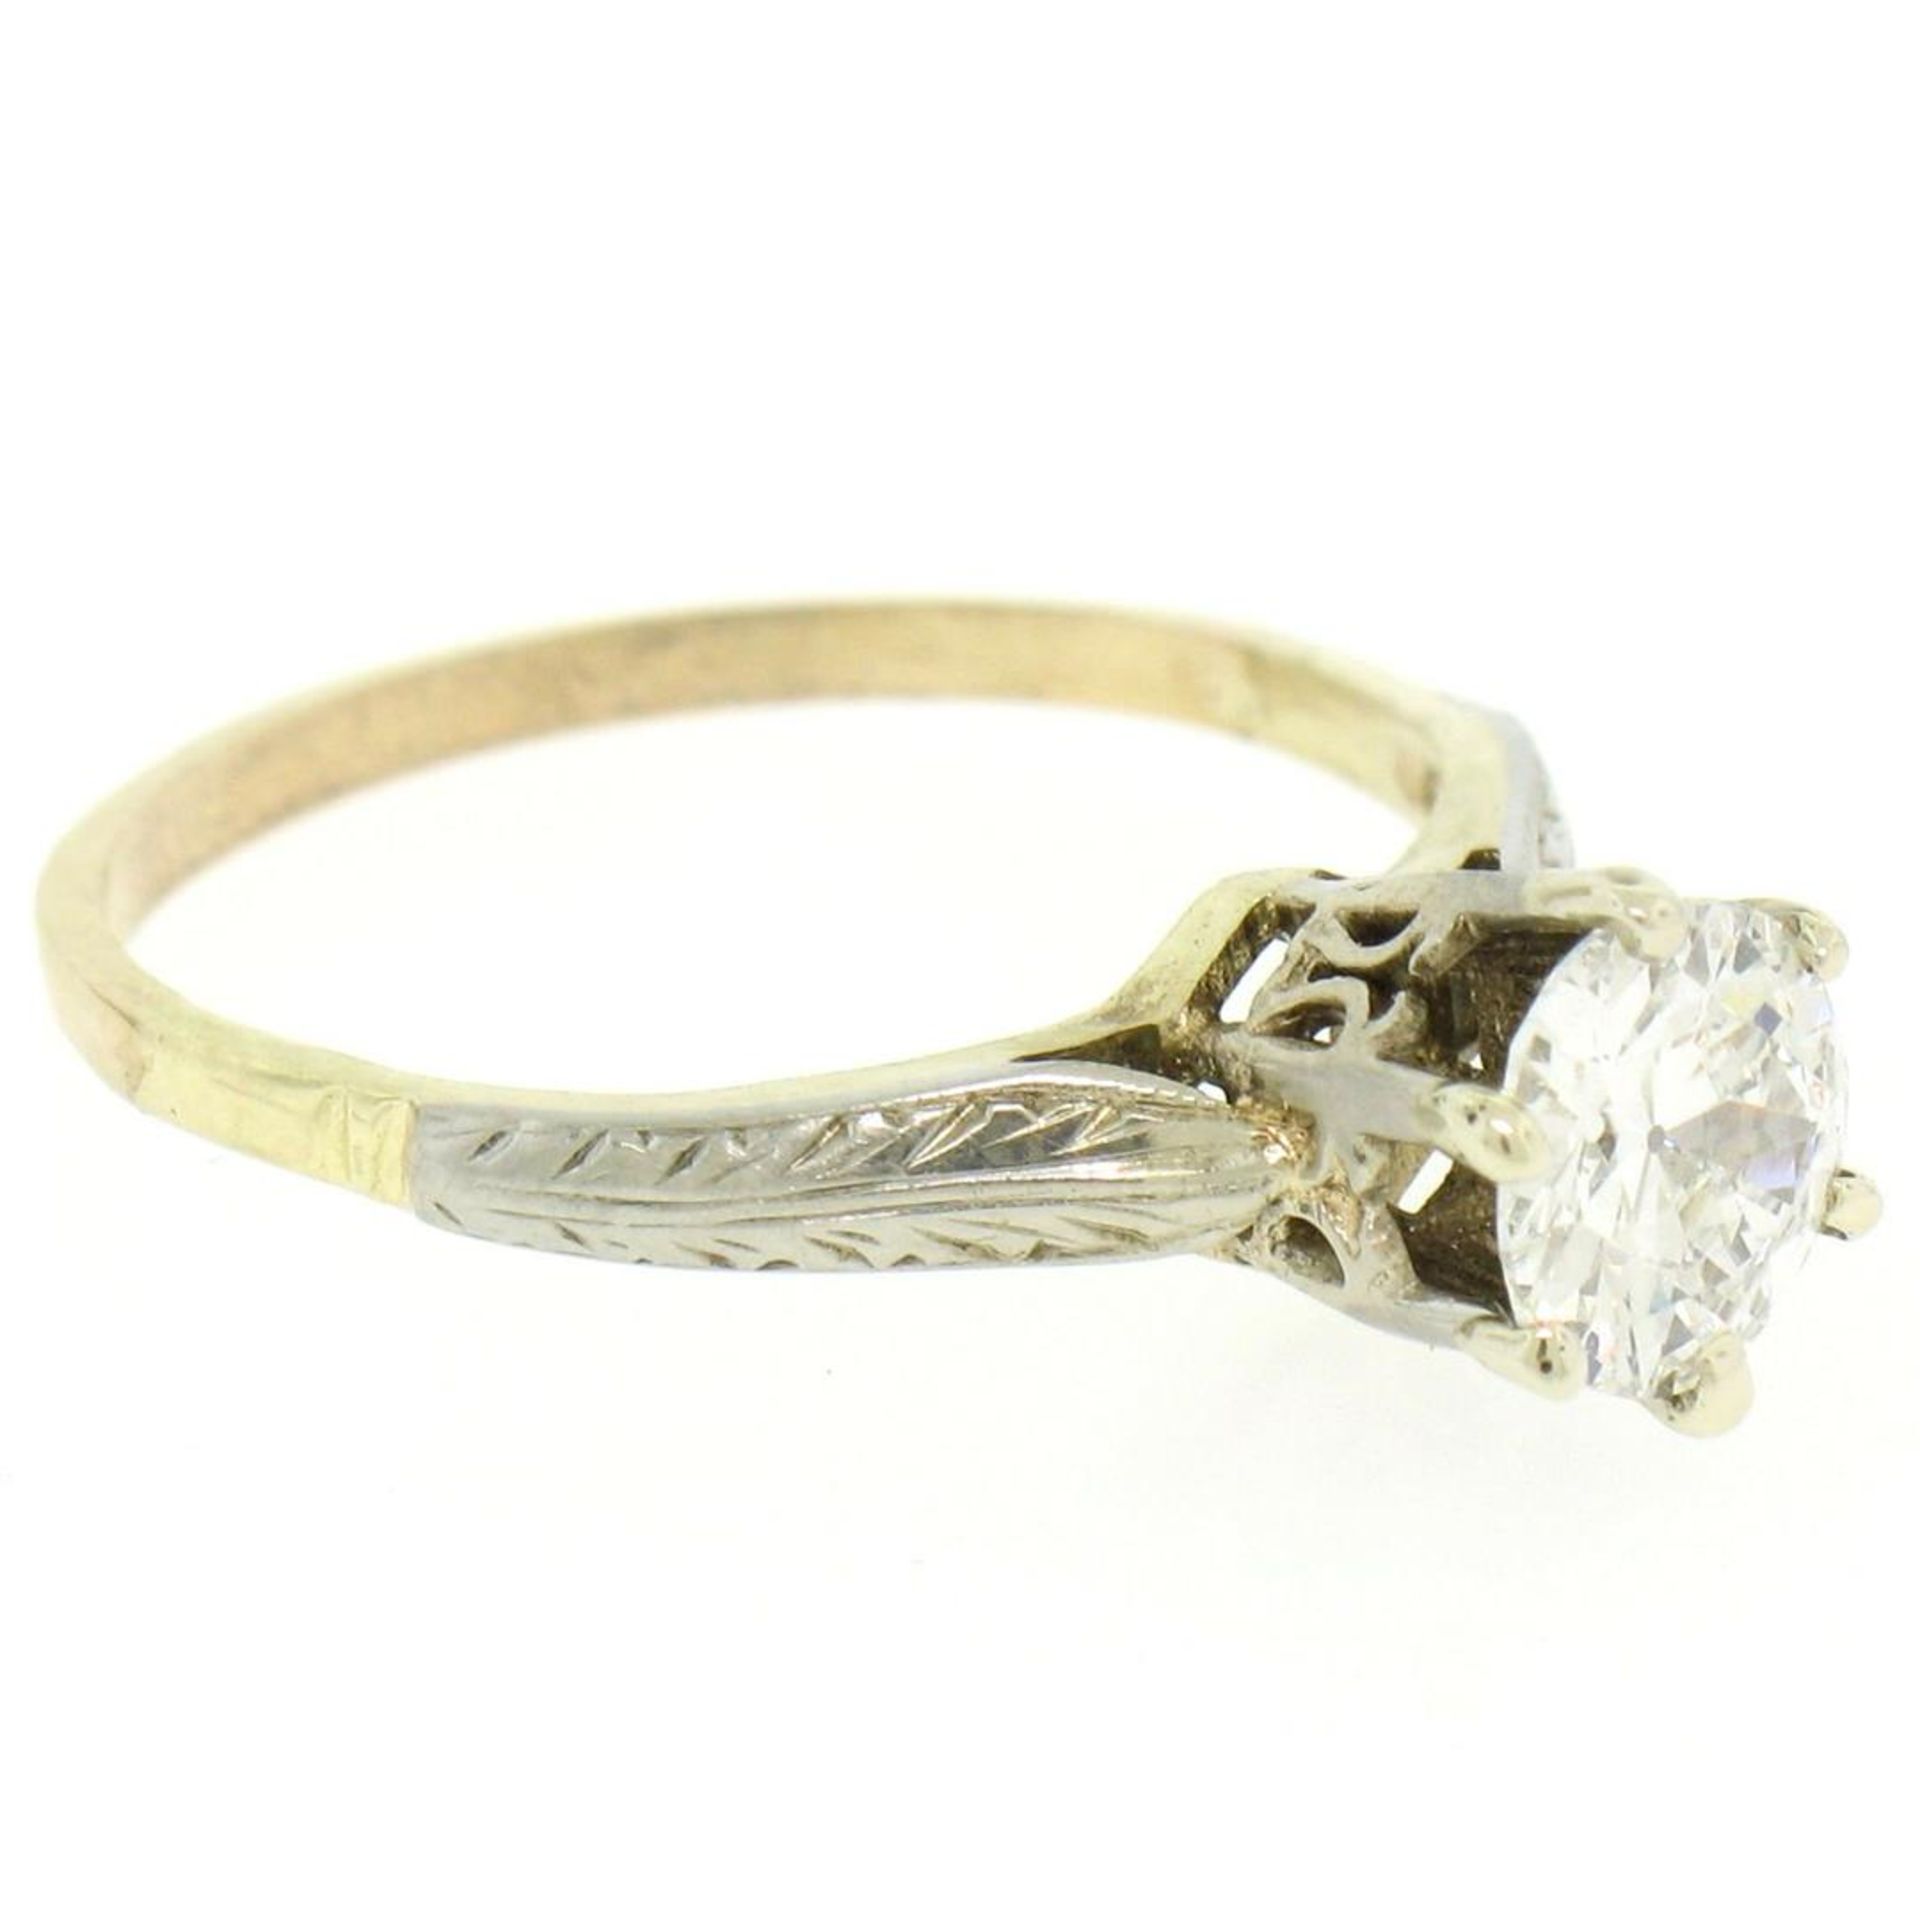 Etched 14k TT Gold .80 ctw European Cut Diamond Solitaire Engagement Ring - Image 7 of 7